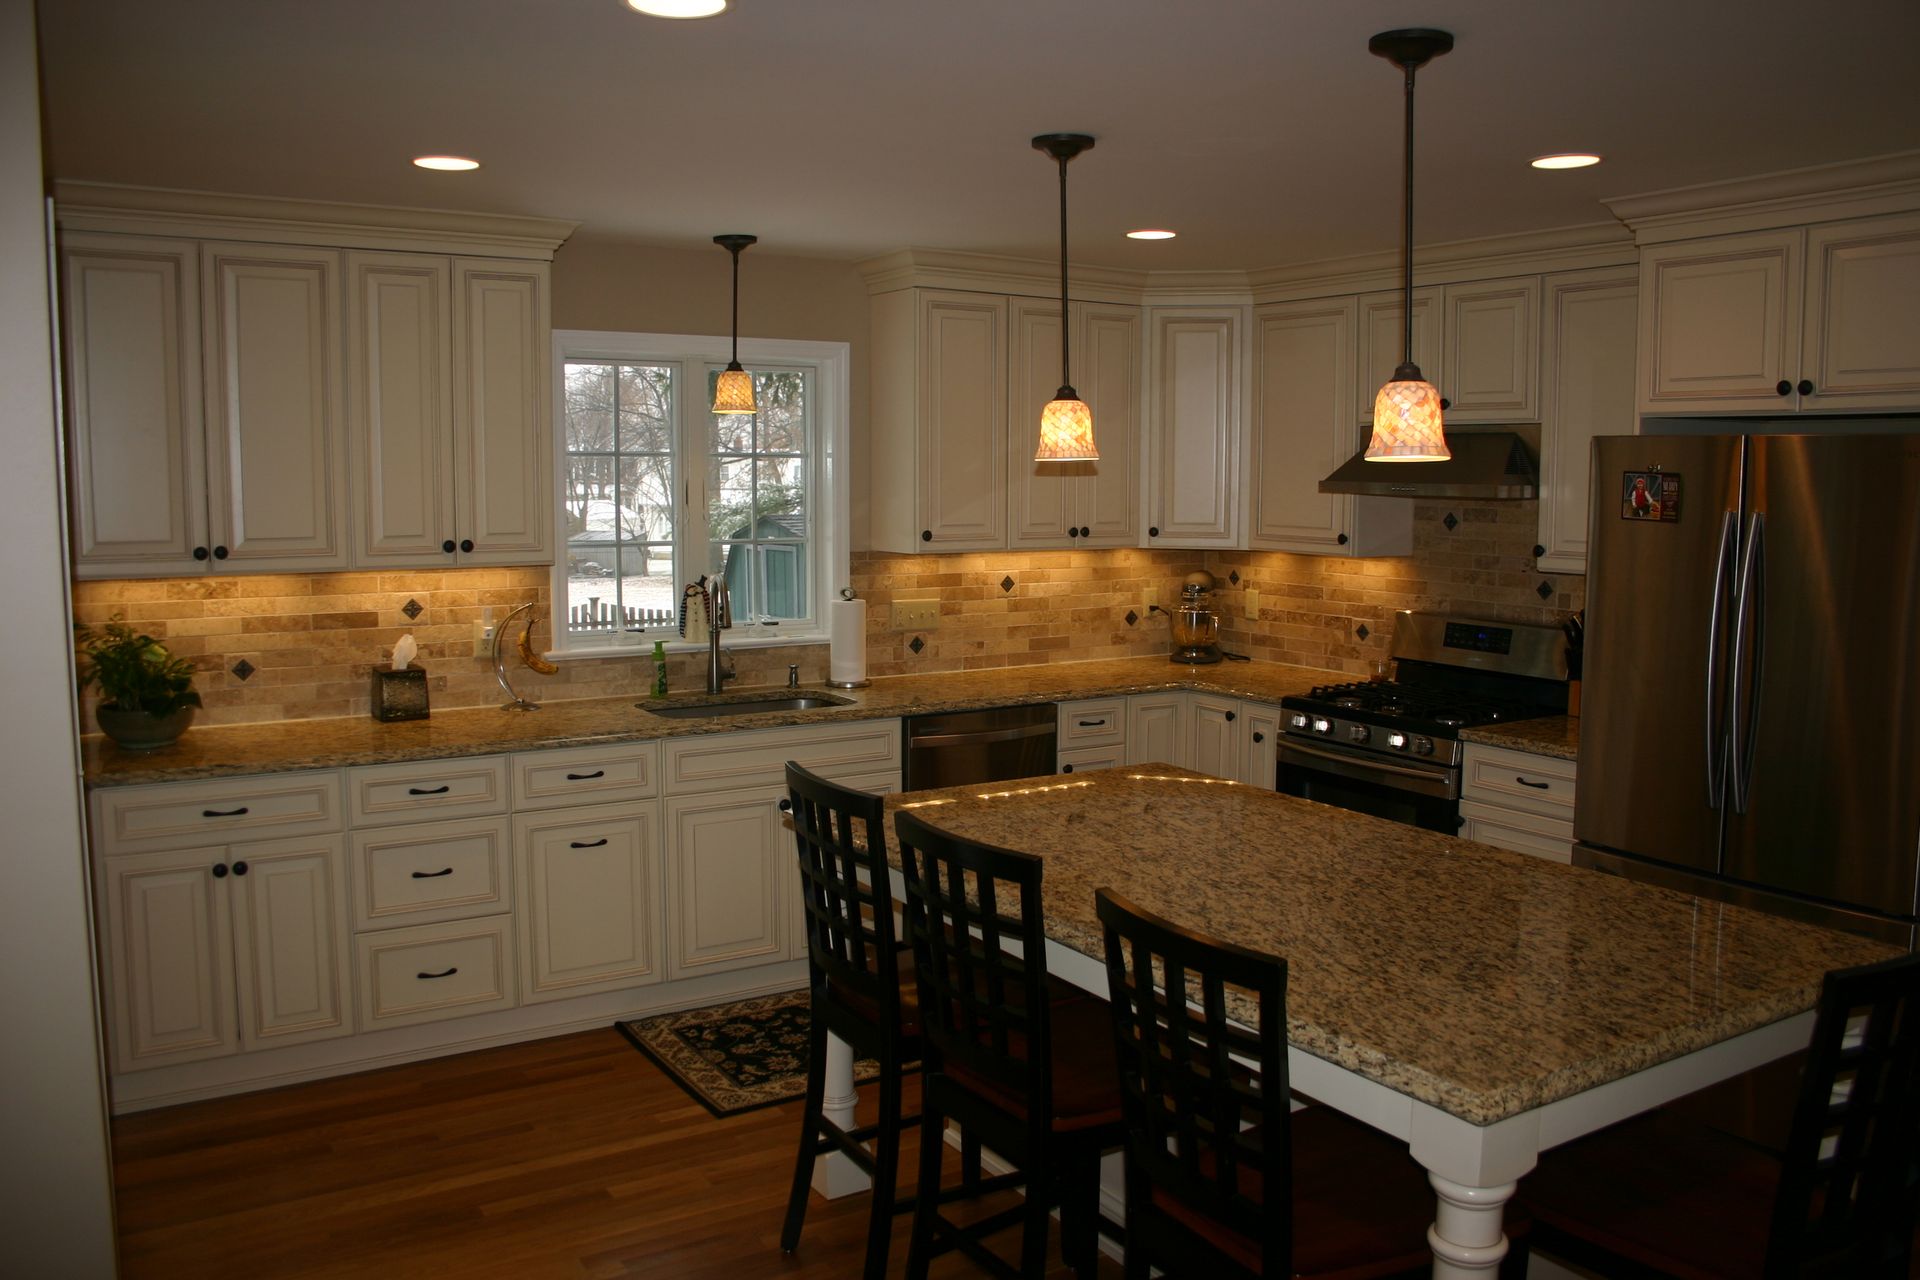 A kitchen with white cabinets and granite counter tops